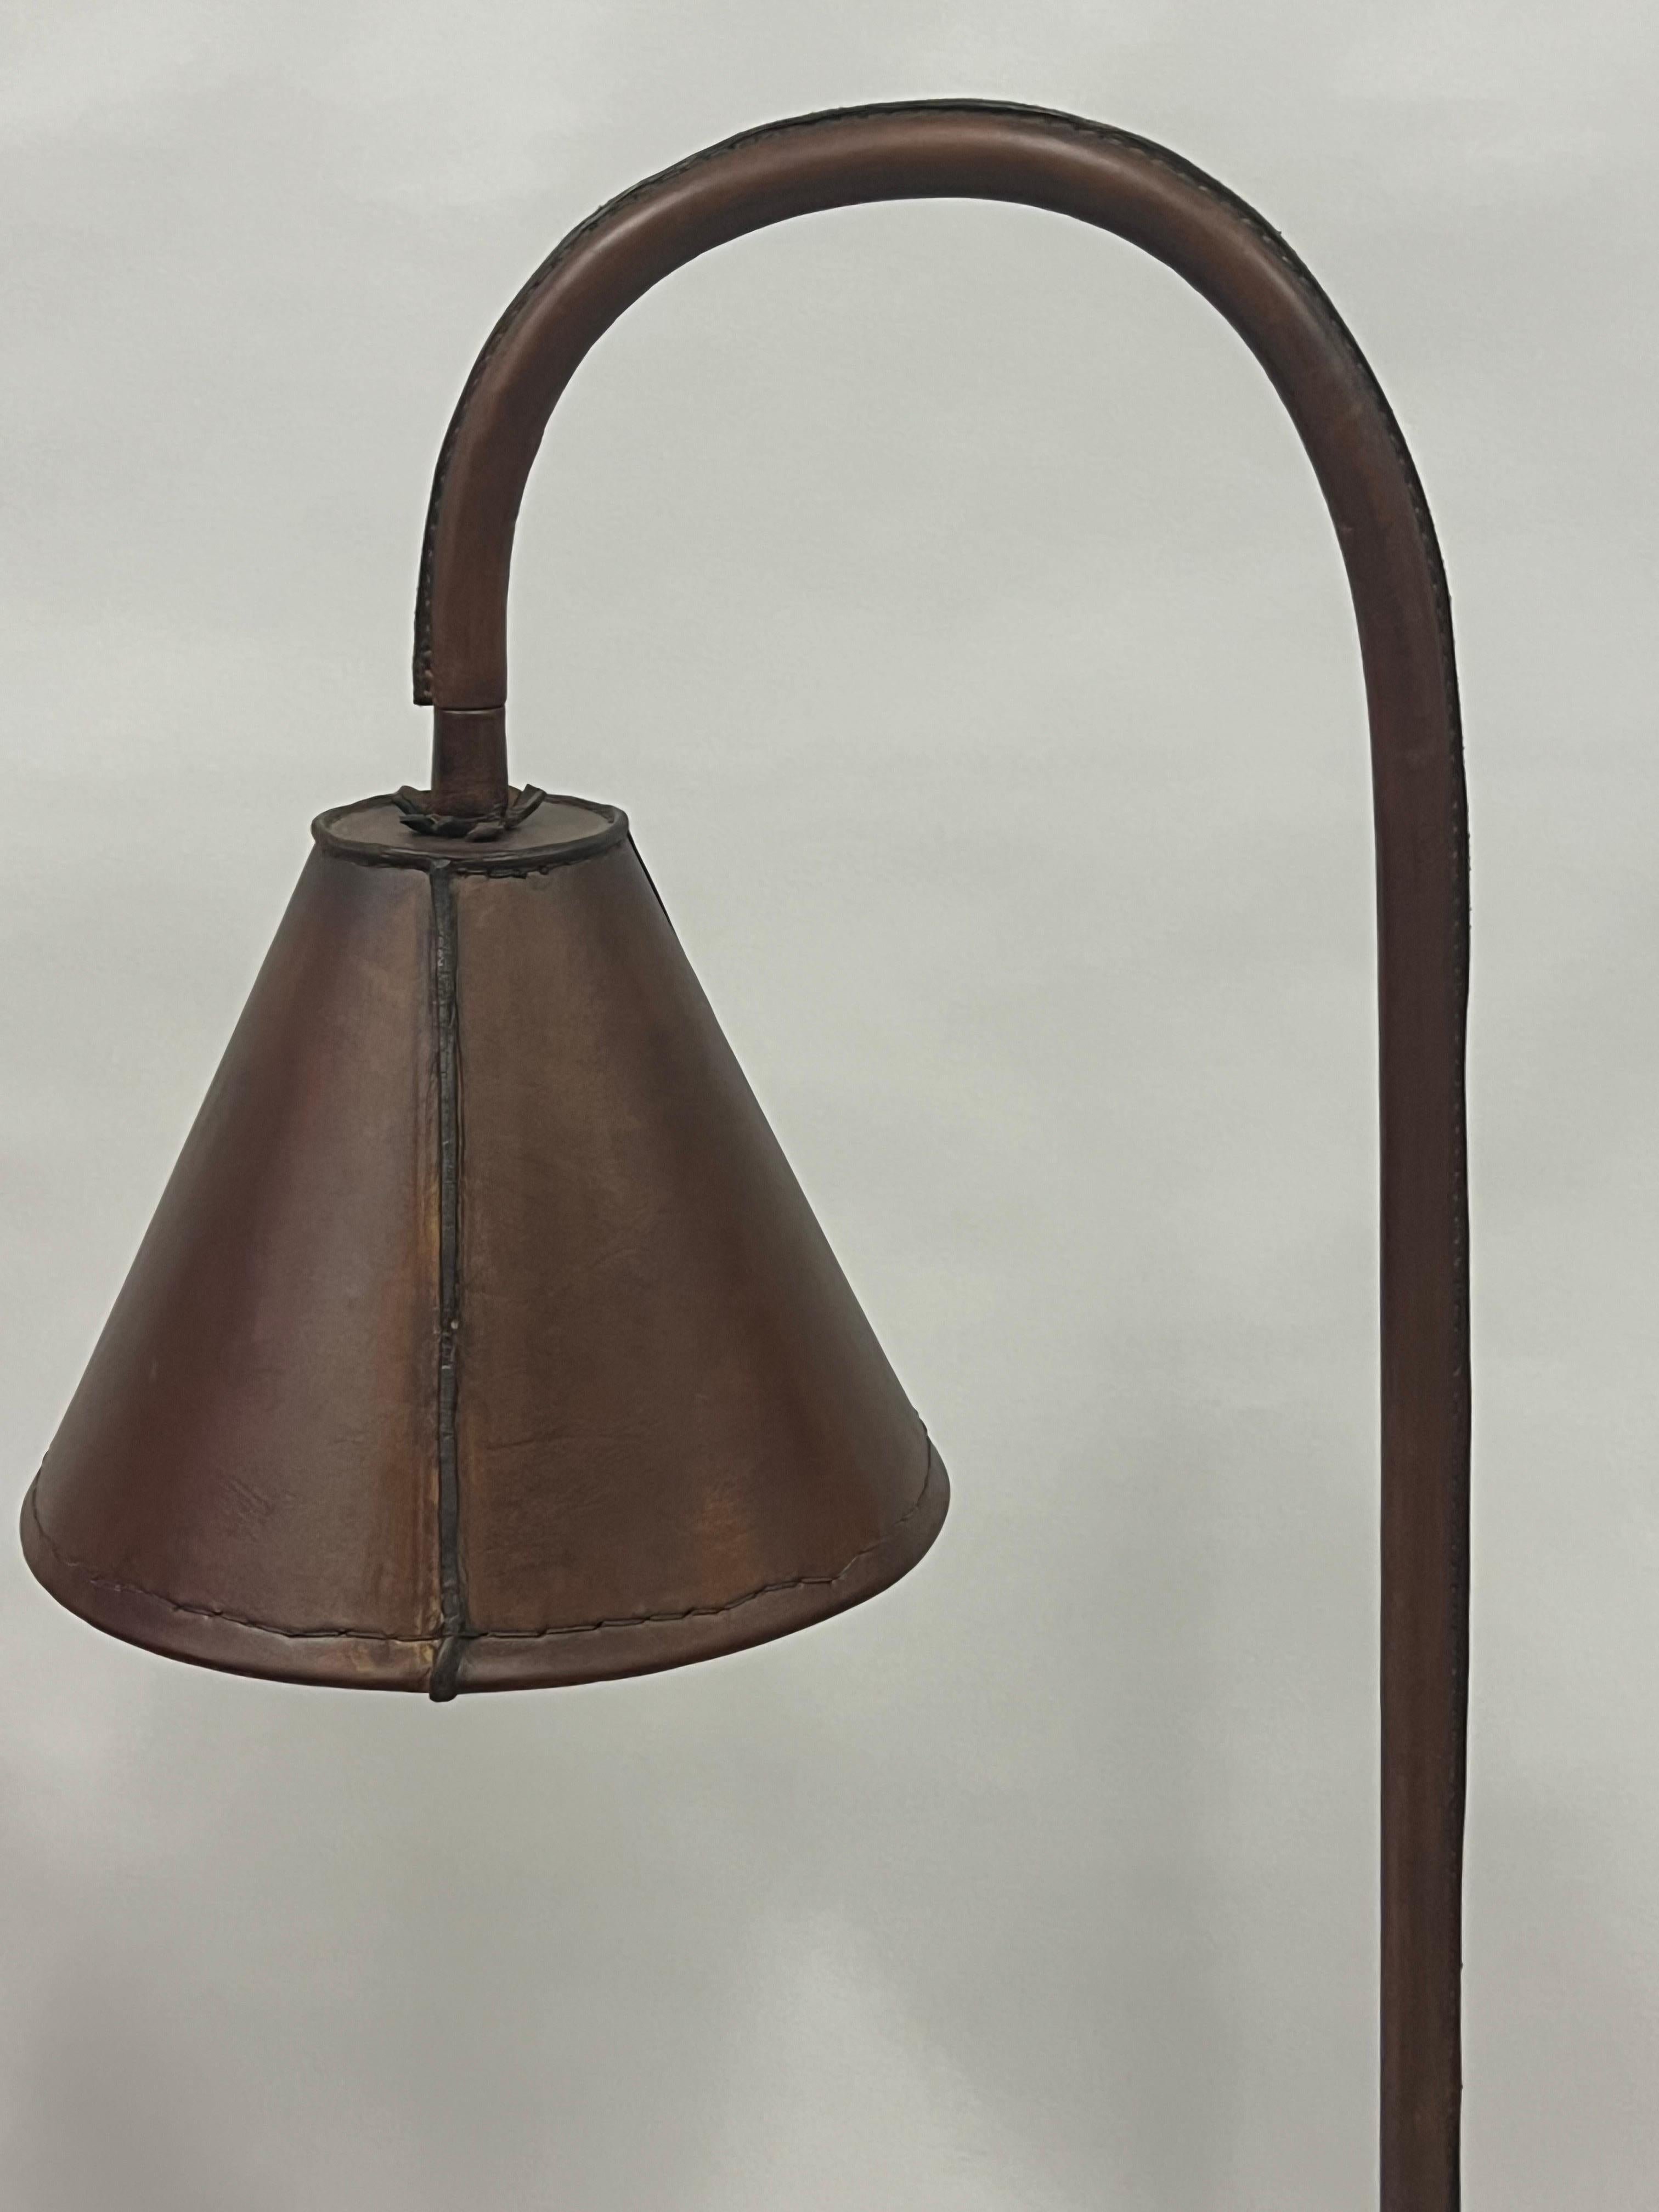 Pair of French Mid-Century Hand-Stitched Leather Floor Lamps by Jacques Adnet For Sale 3